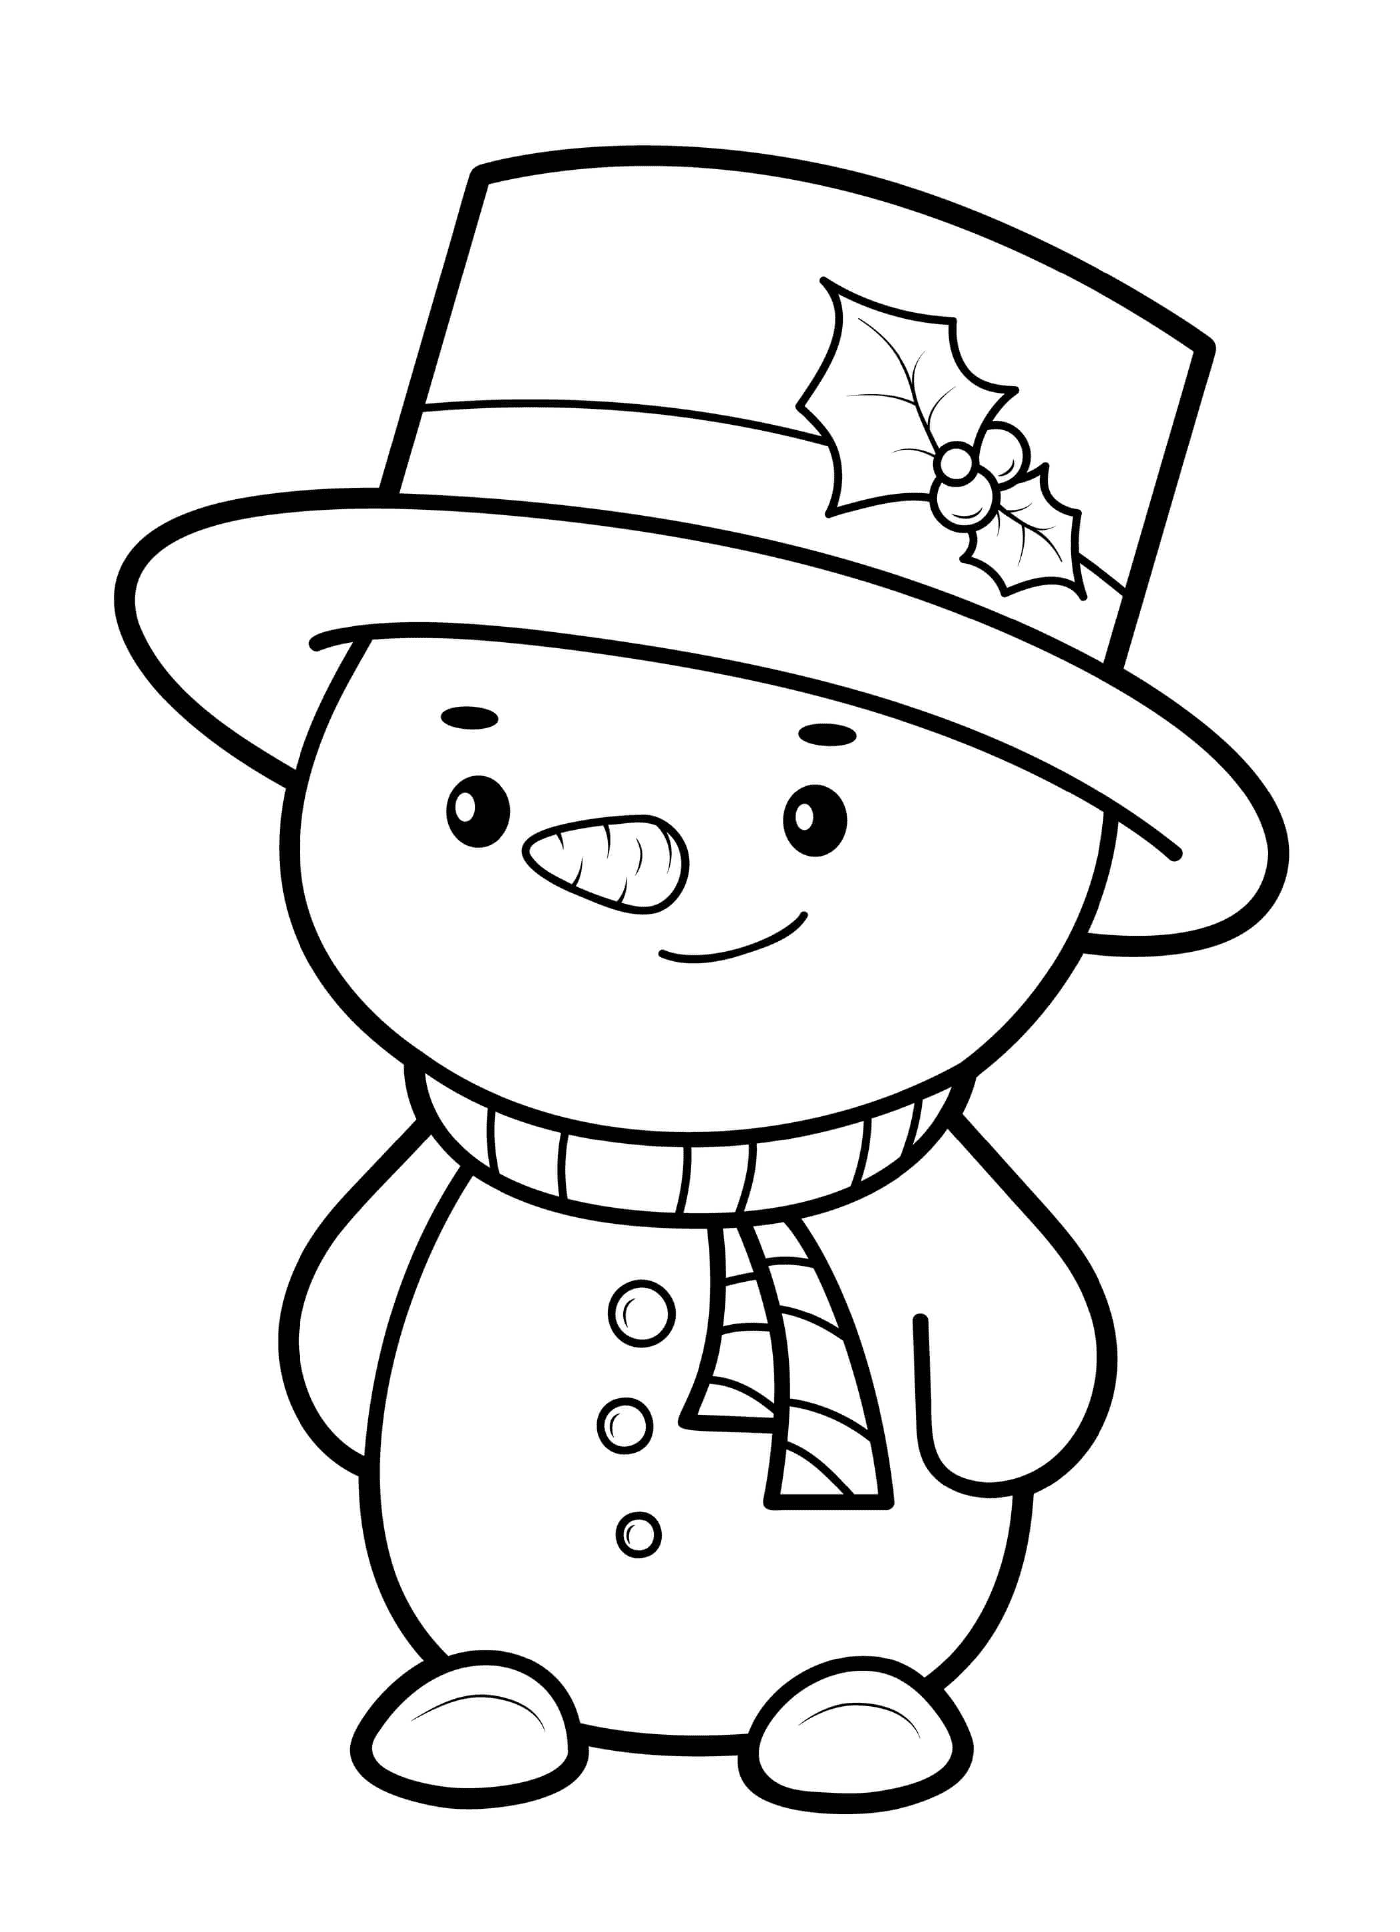  A snowman with a Christmas hat 